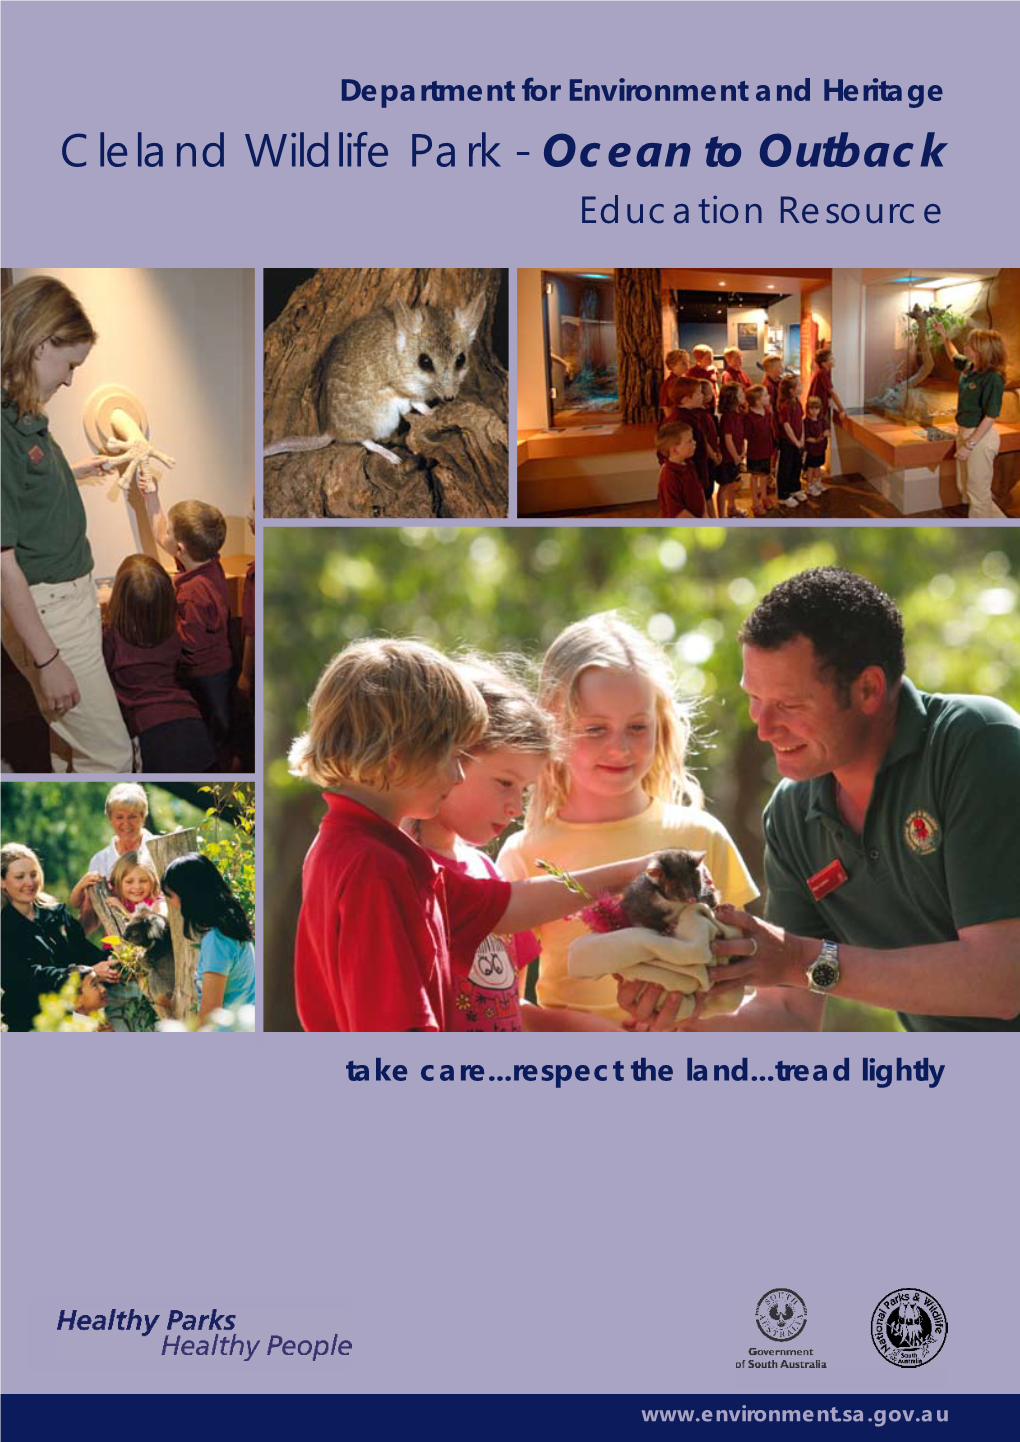 Cleland Wildlife Park - Ocean to Outback Education Resource